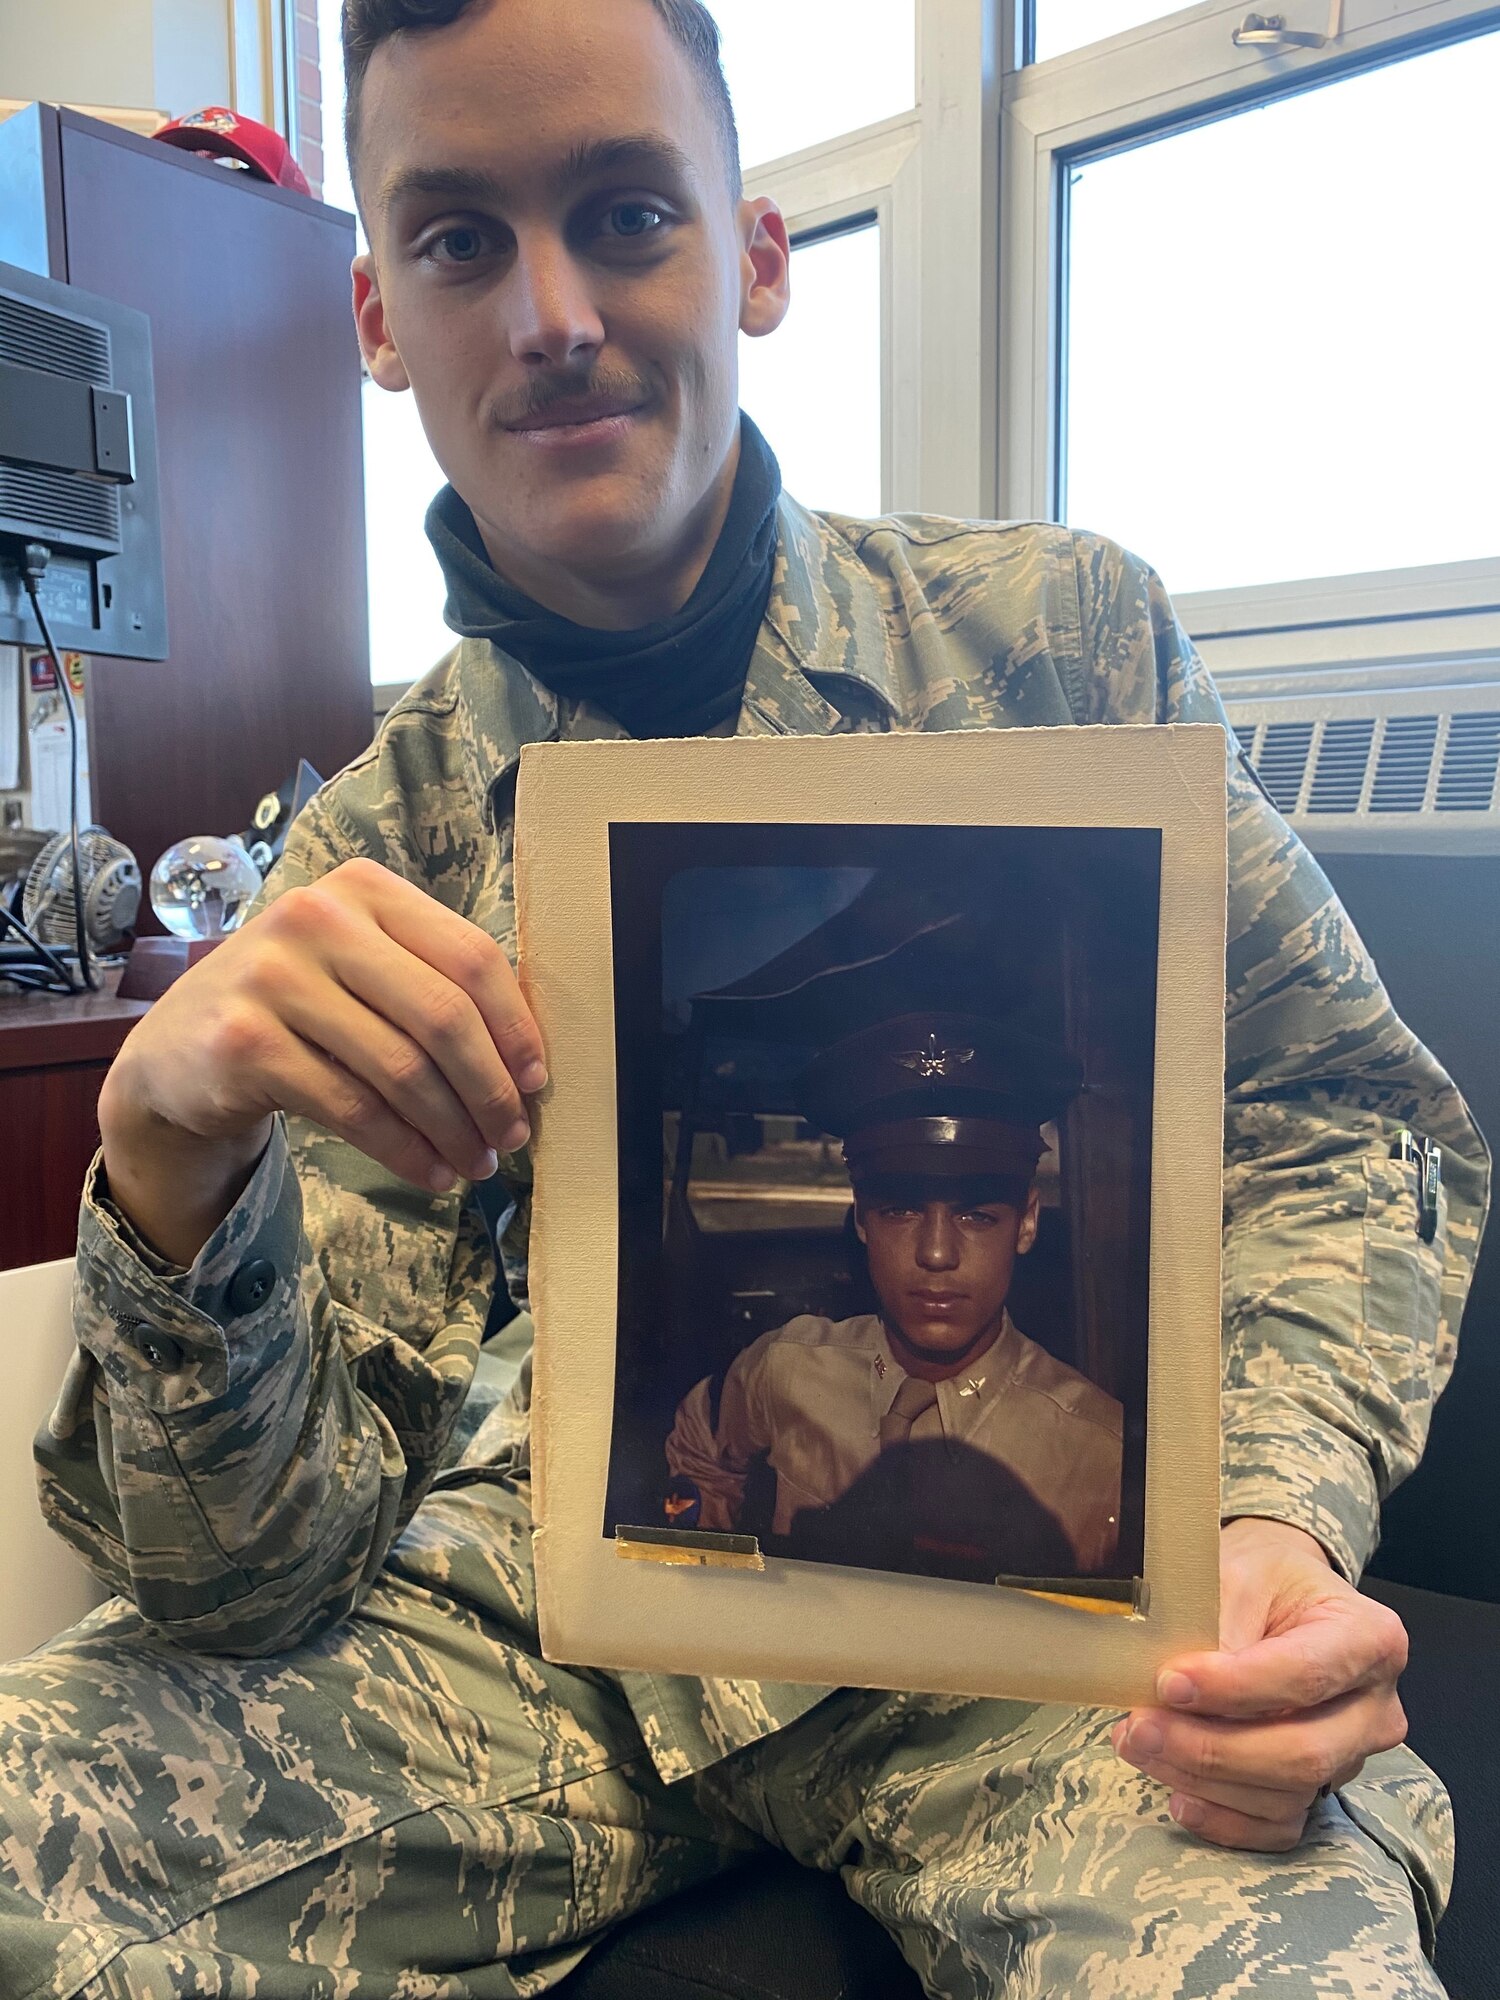 Airman 1st Class Stephen D. Gallwey, 270th Engineering Installation Squadron cable antenna technician, with a photo of his grandfather, 1st Lt. James H. Gallwey, an original Tuskegee Airmen pilot, Dec. 6, 2020, in Horsham, Pennsylvania. His grandfather’s legacy motivated his decision to join the Air National Guard.